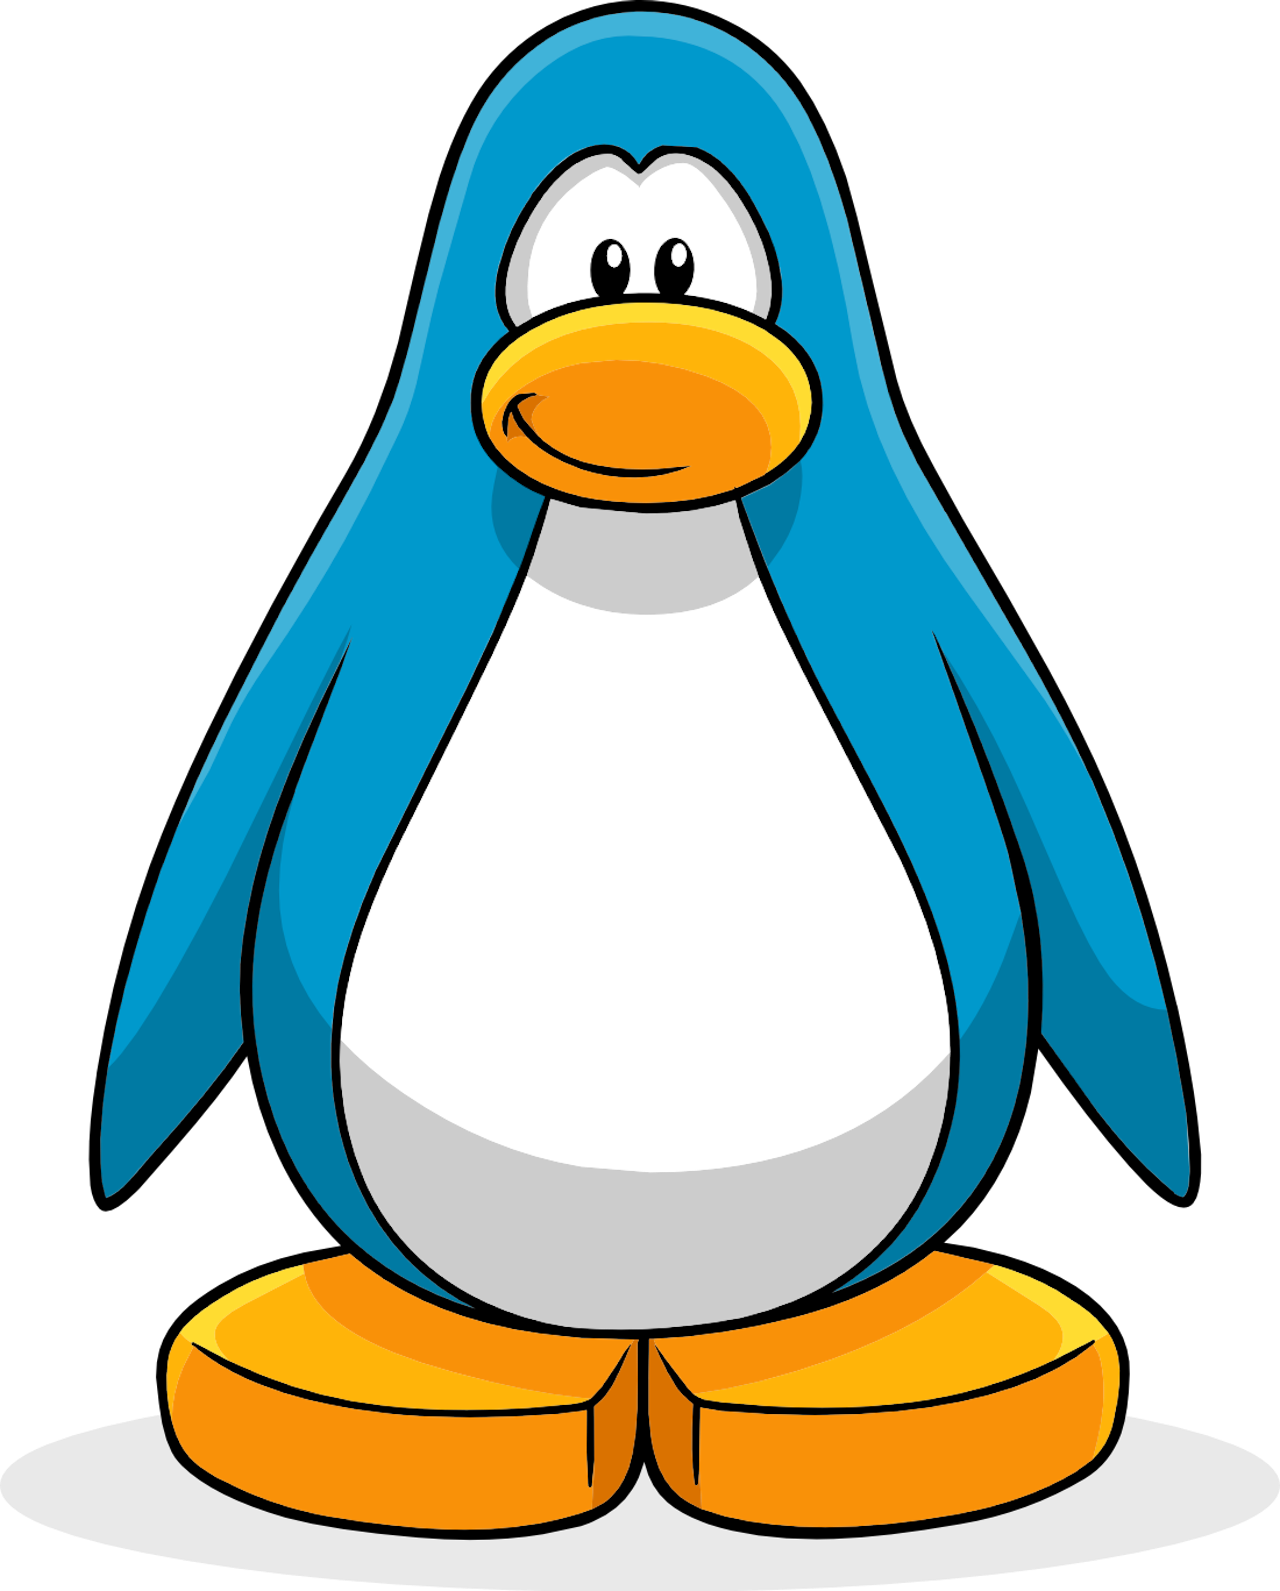 Image result for club penguin